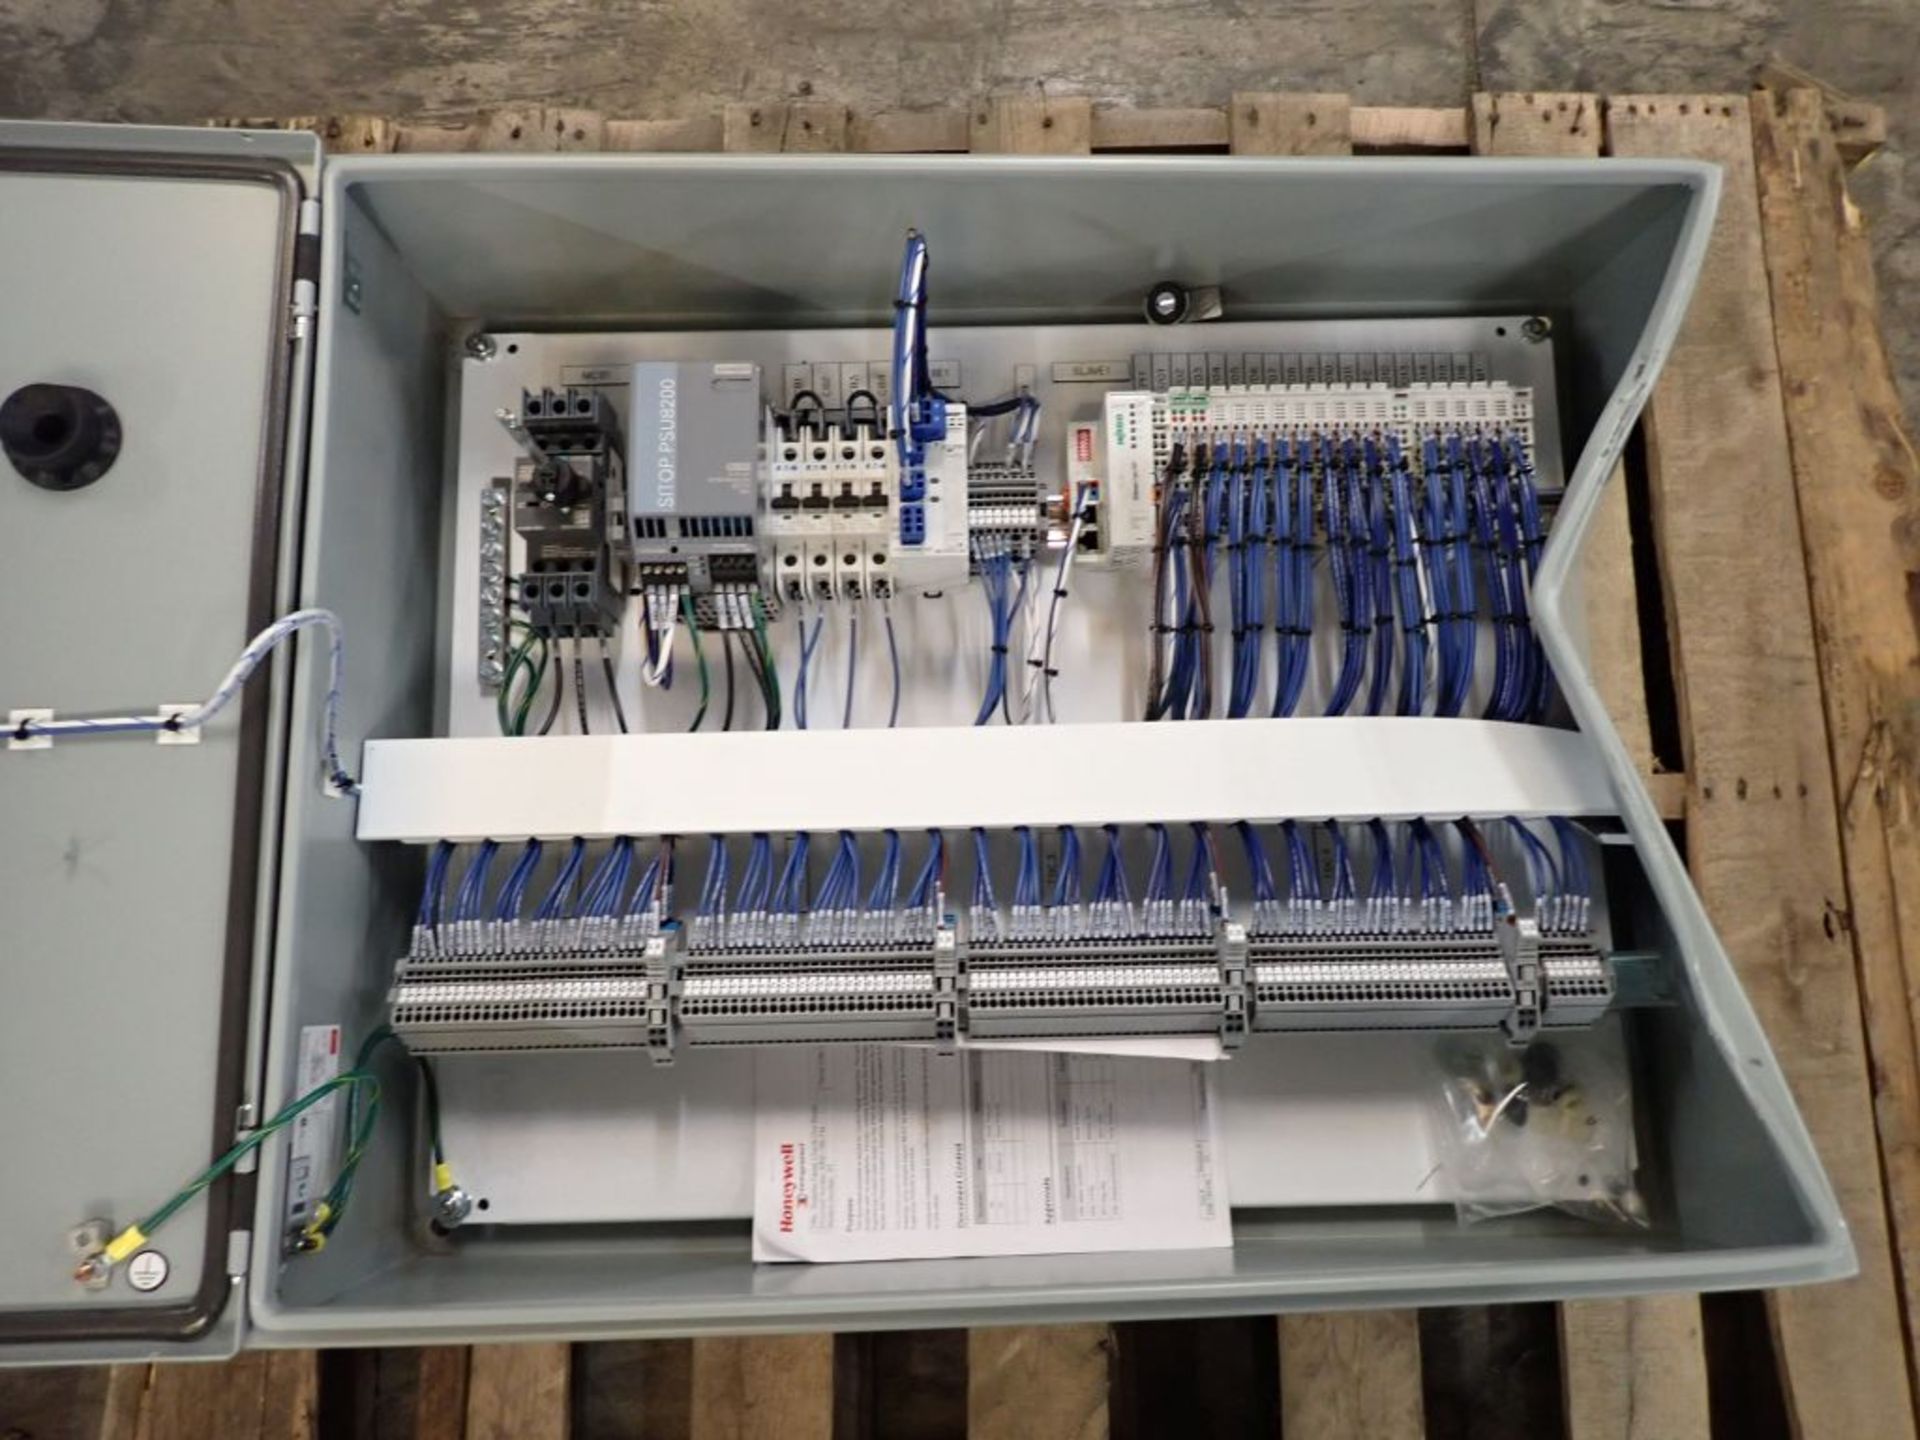 Hoffman Nvent Industrial Control Panel Enclosure with Contents - Image 9 of 11